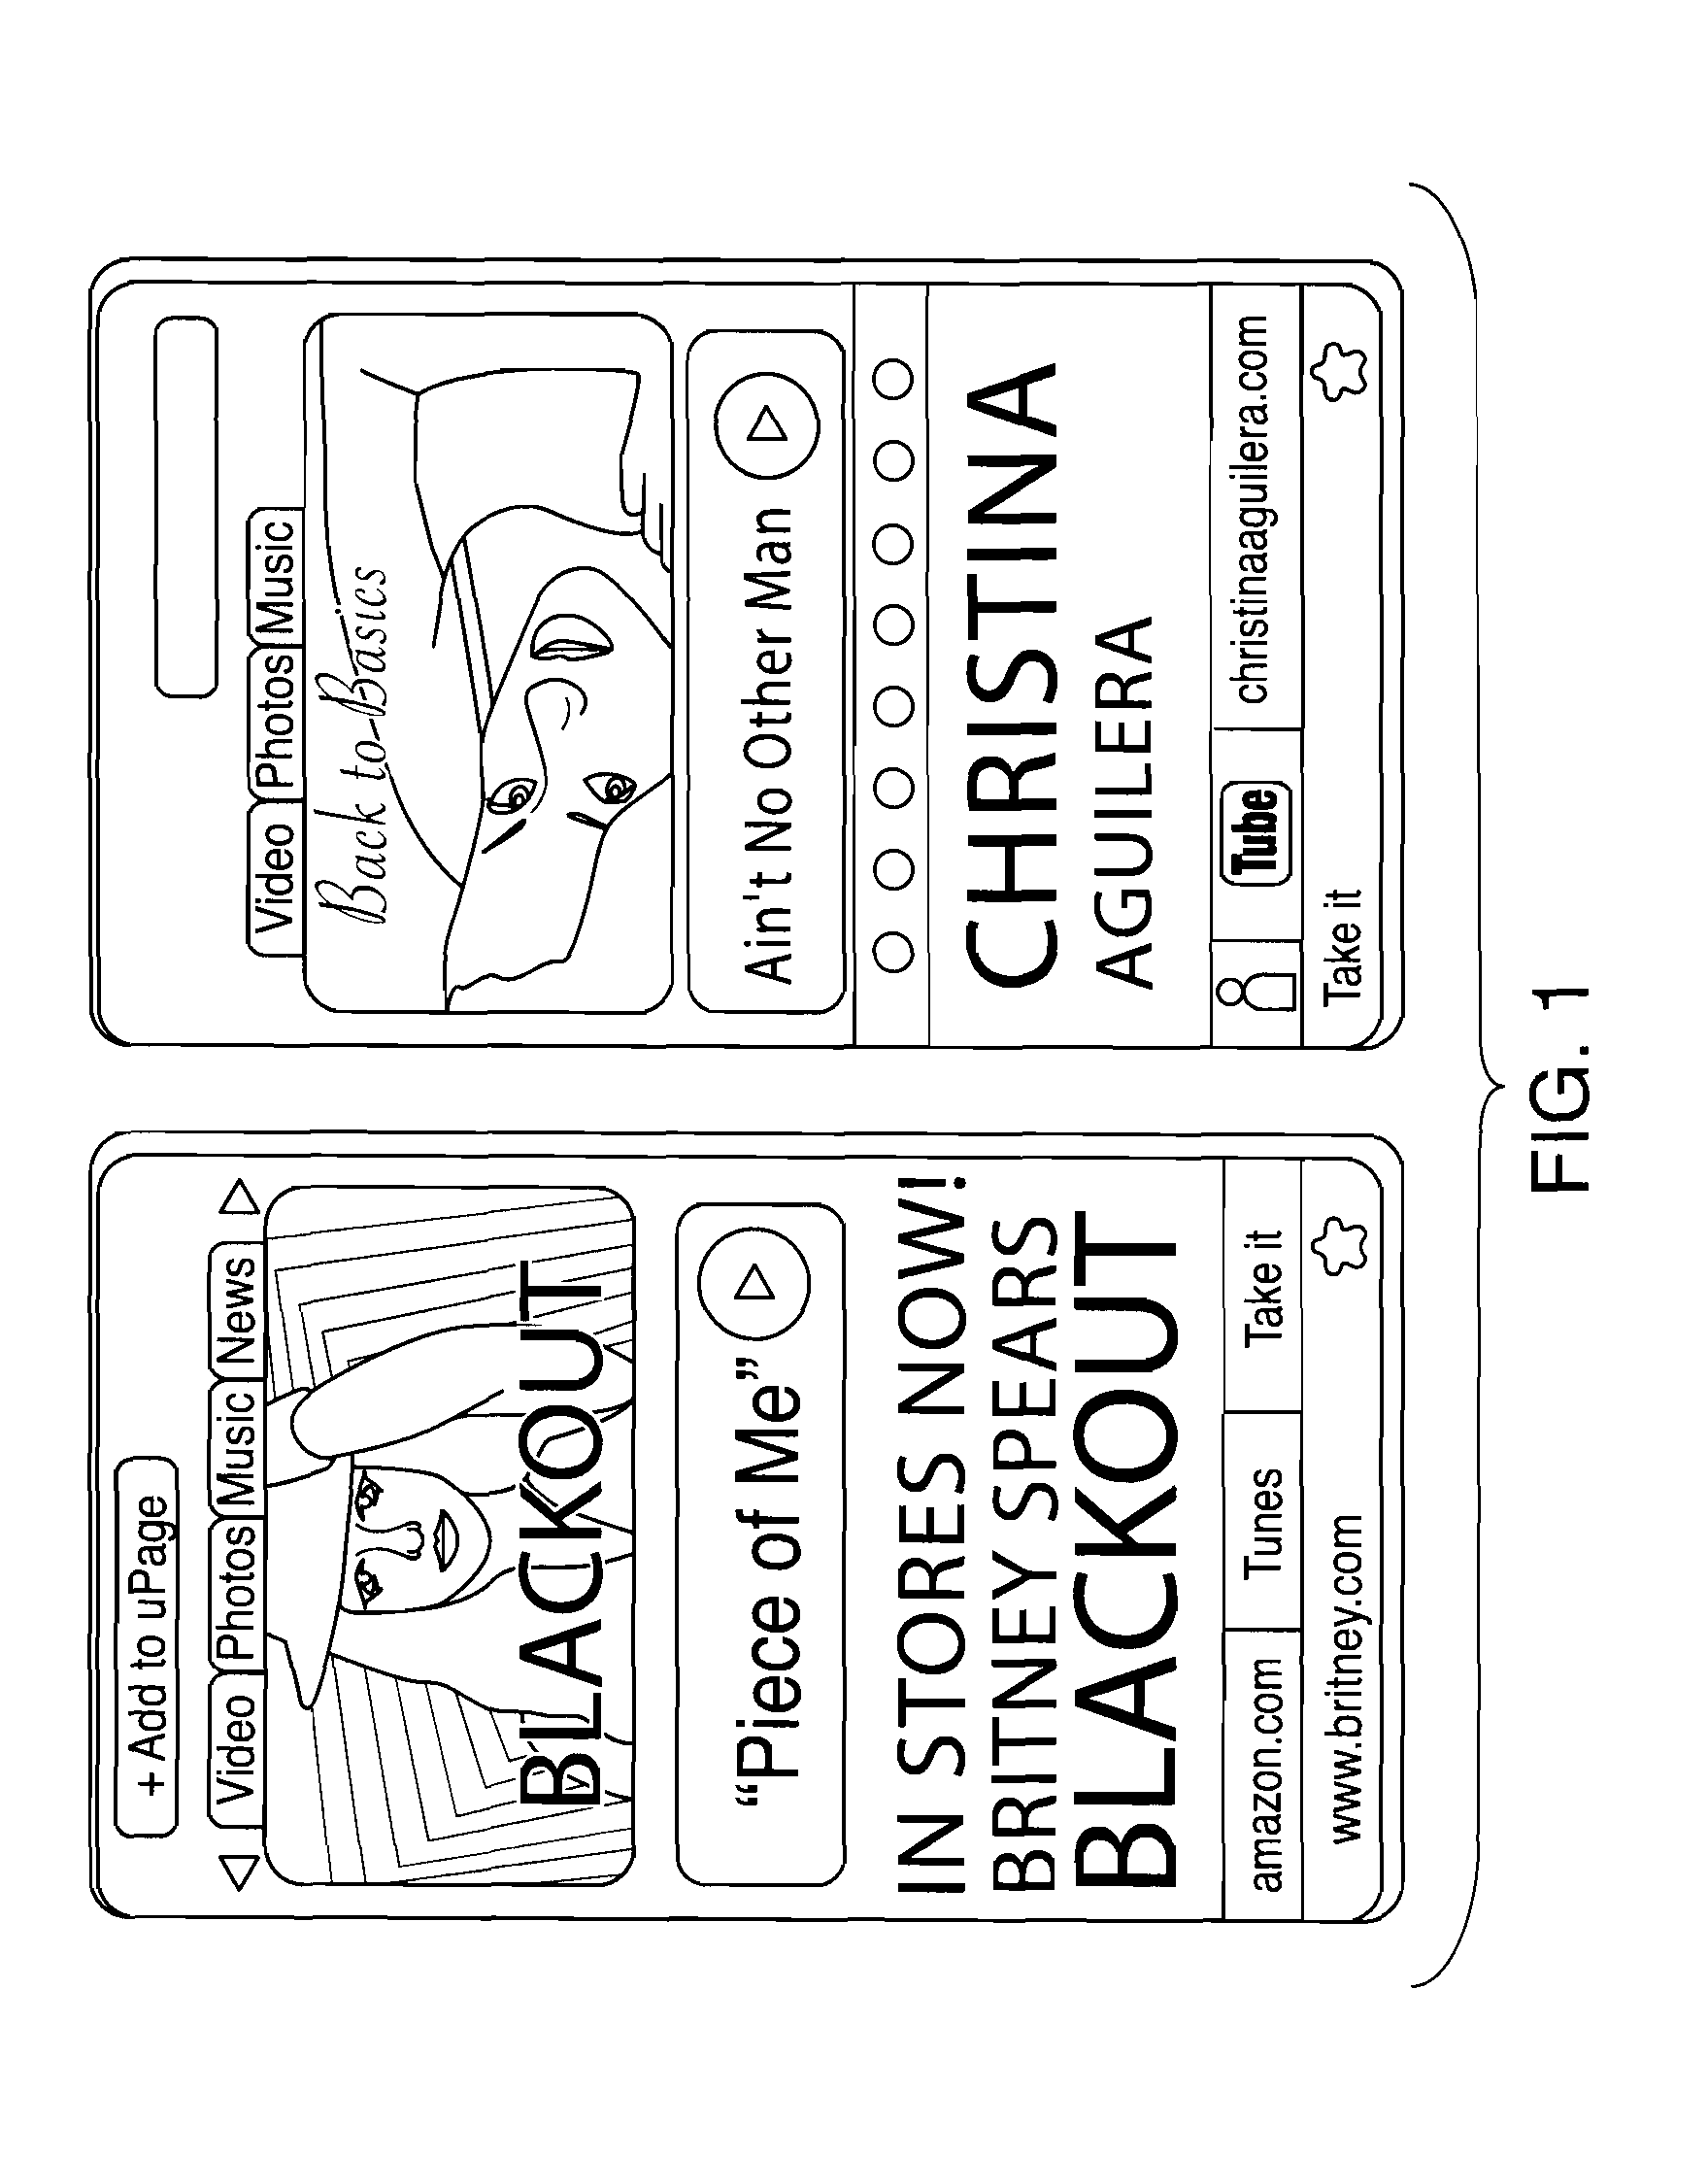 Device and Method for Creating, Distributing, Managing and Monetizing Widgets in a Mobile Environment